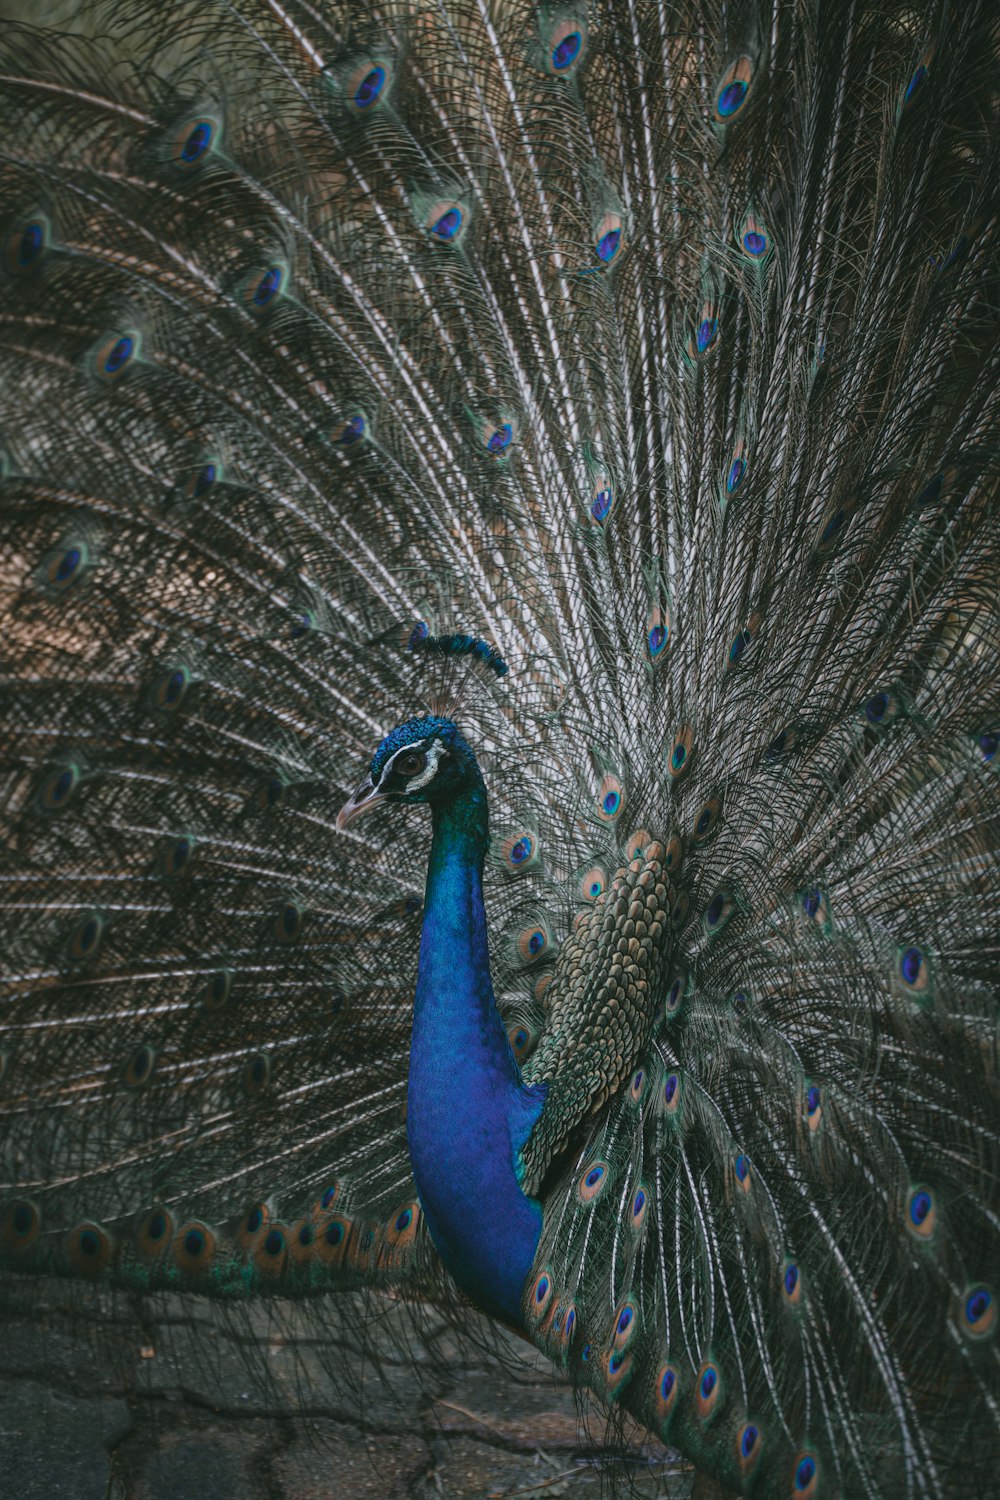 peacock showing his tail